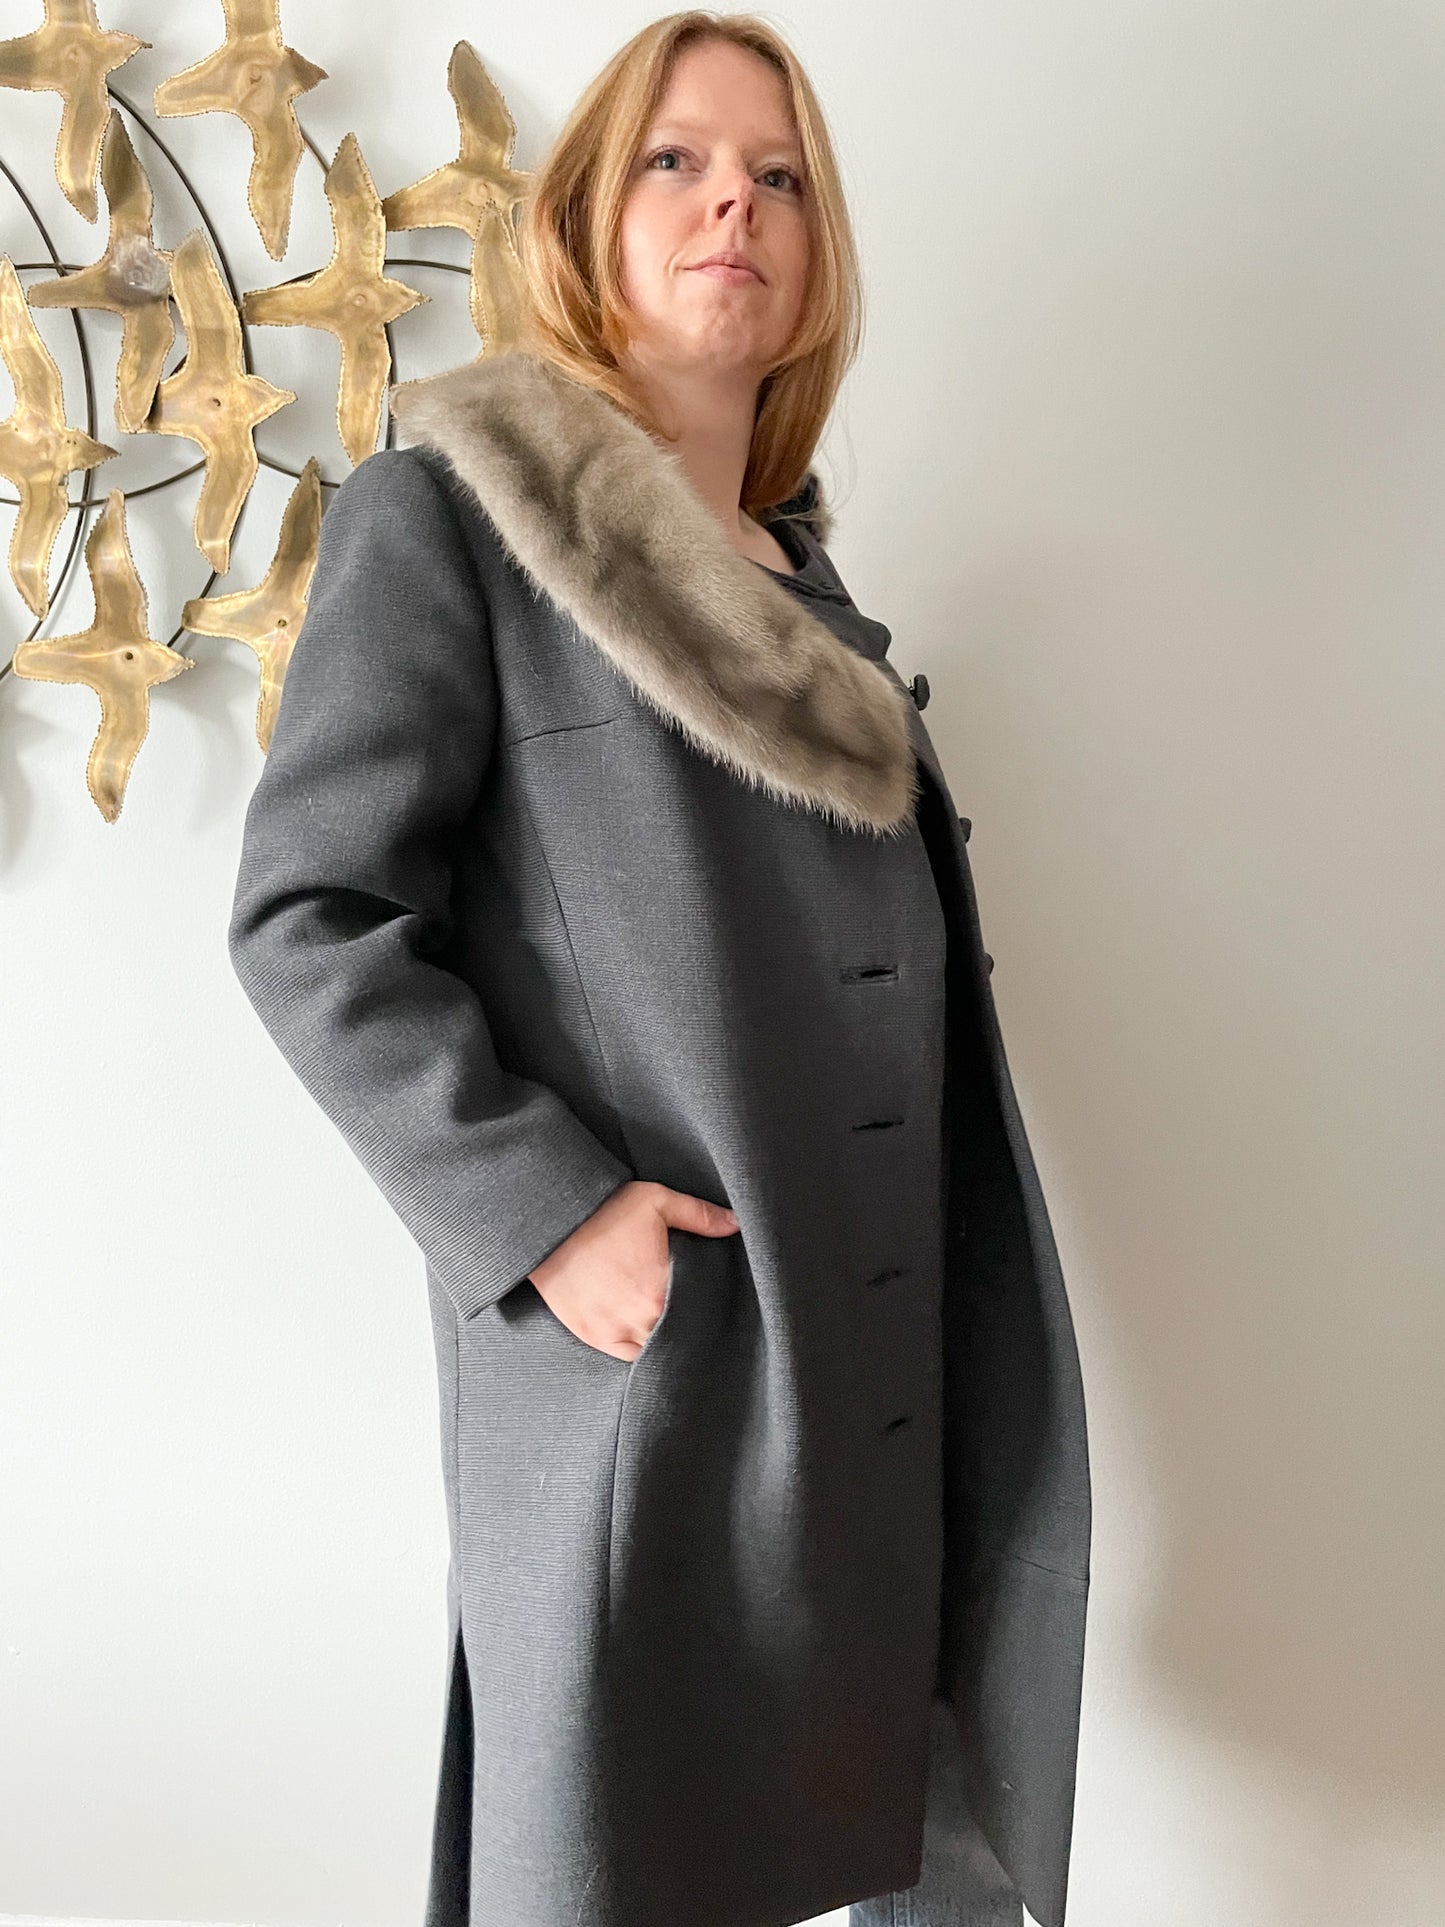 Vintage Grey Wool Long Coat with Fur Trim - Small